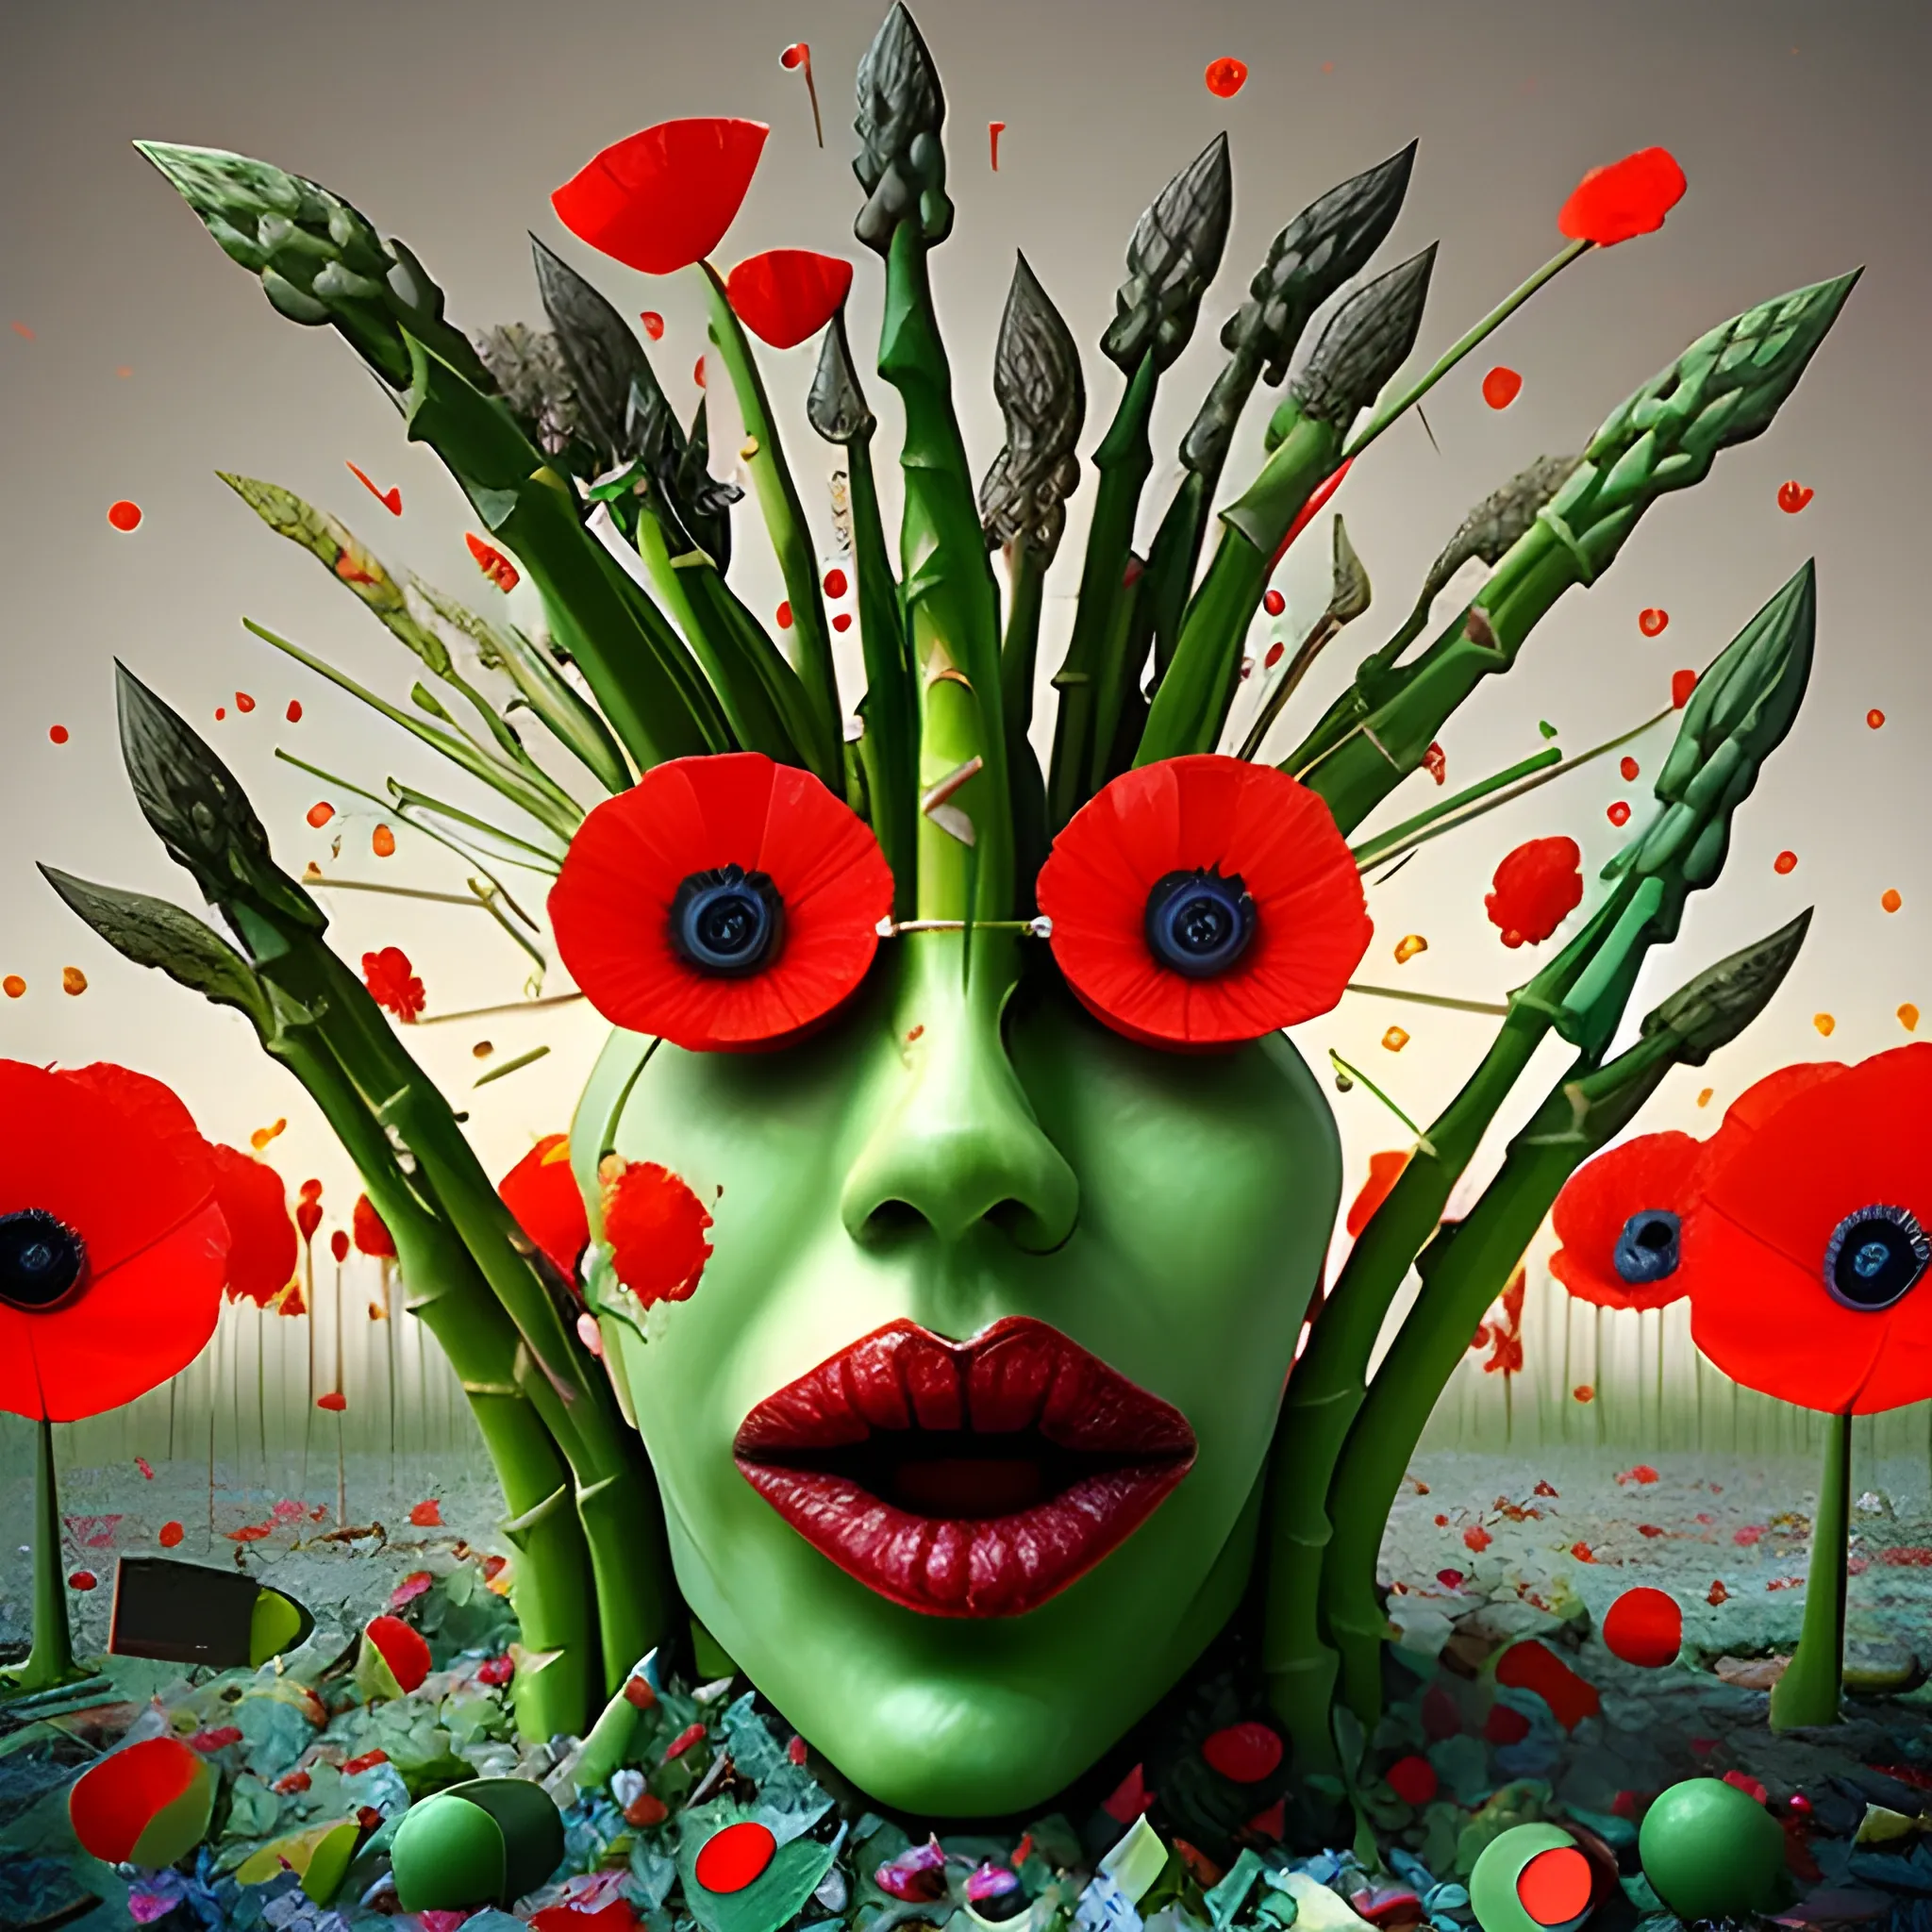 make a sculpture of many crystal crazy asparagus with human face, poppies around, many broken glass in the air, saturated colors
surrealism, chaotic background, 3D, Trippy,  eerie atmosphere, close up, Oil Painting, angular perspective 